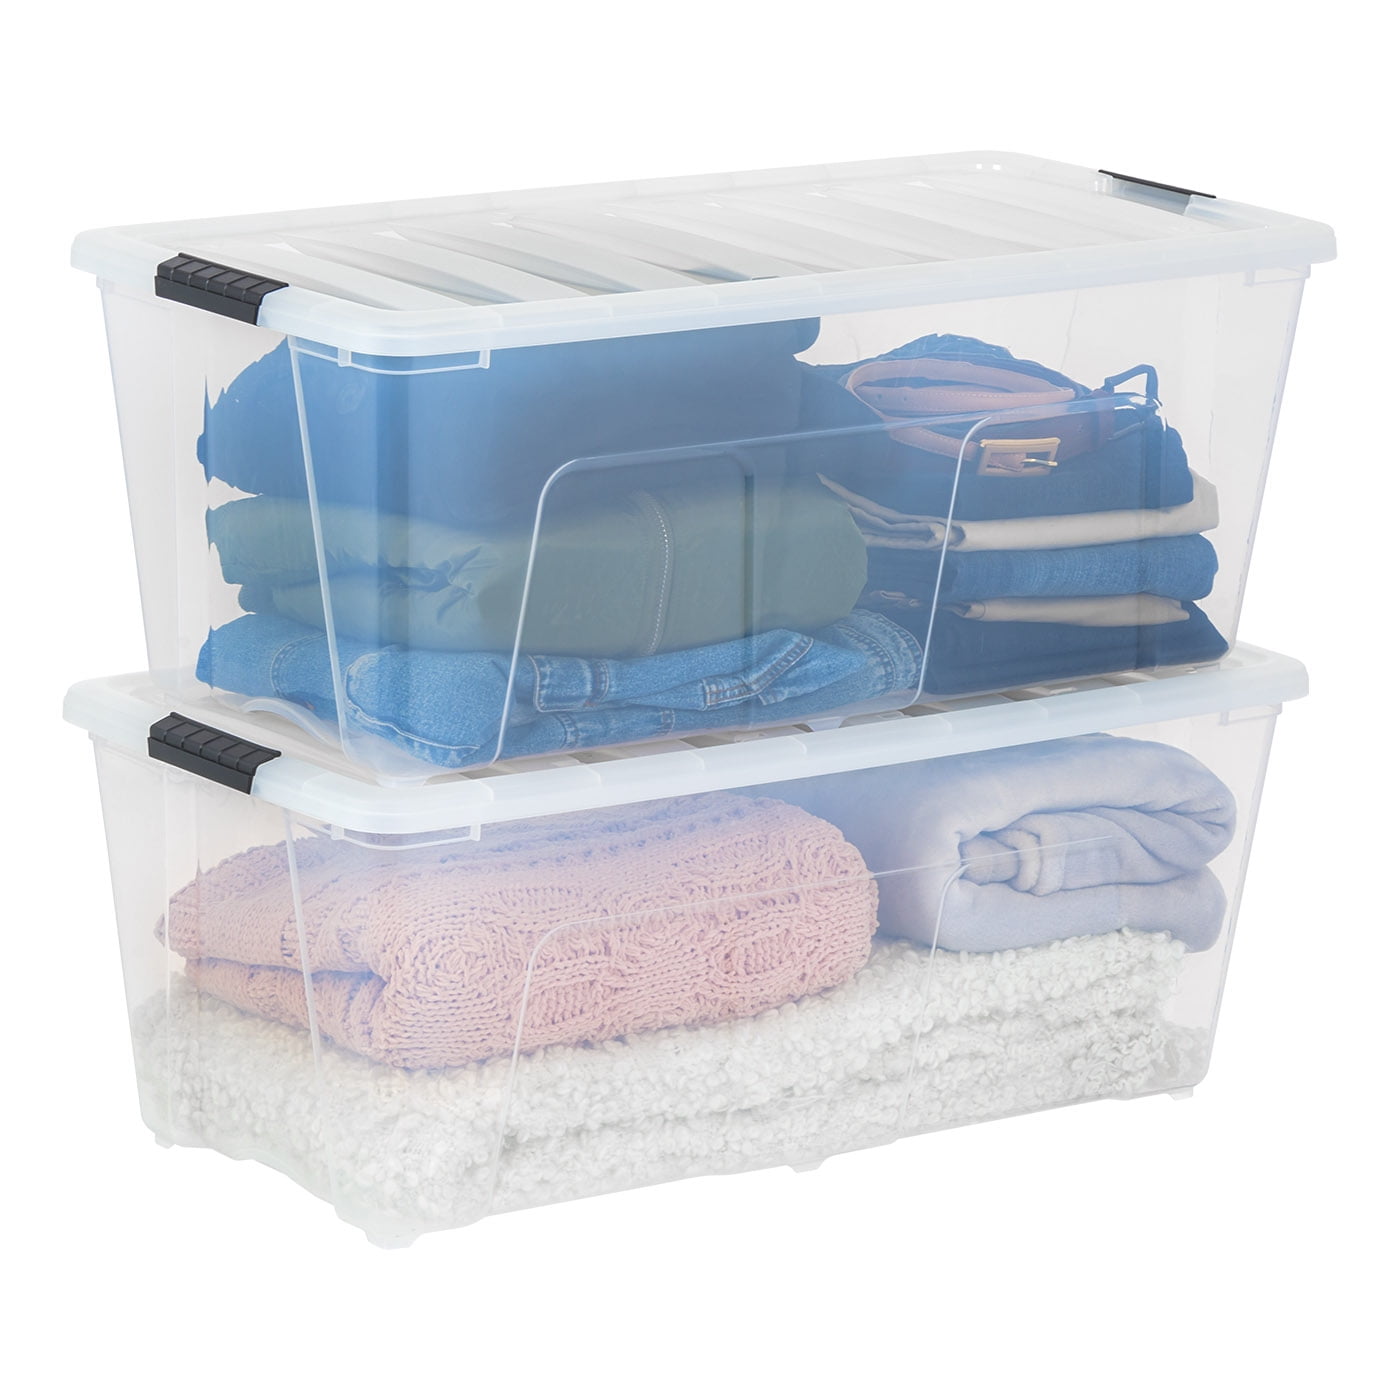 Iris 15 Gallon Clear Plastic Storage Boxes With Blue Lid 4pk